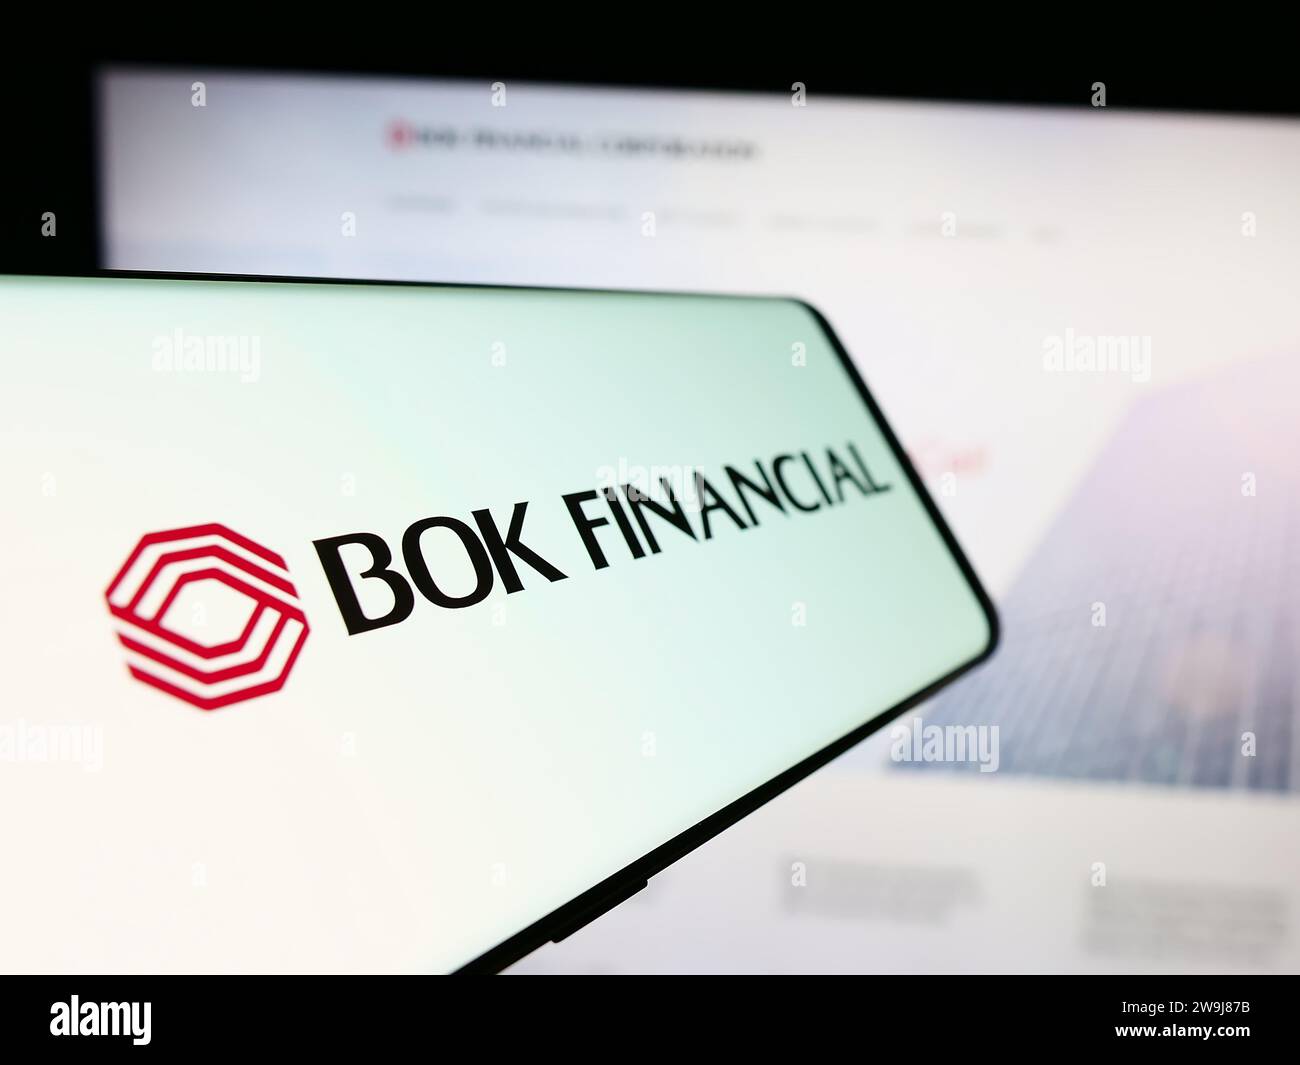 Smartphone with logo of American financial services company BOK Financial Corporation in front of website. Focus on center-left of phone display. Stock Photo